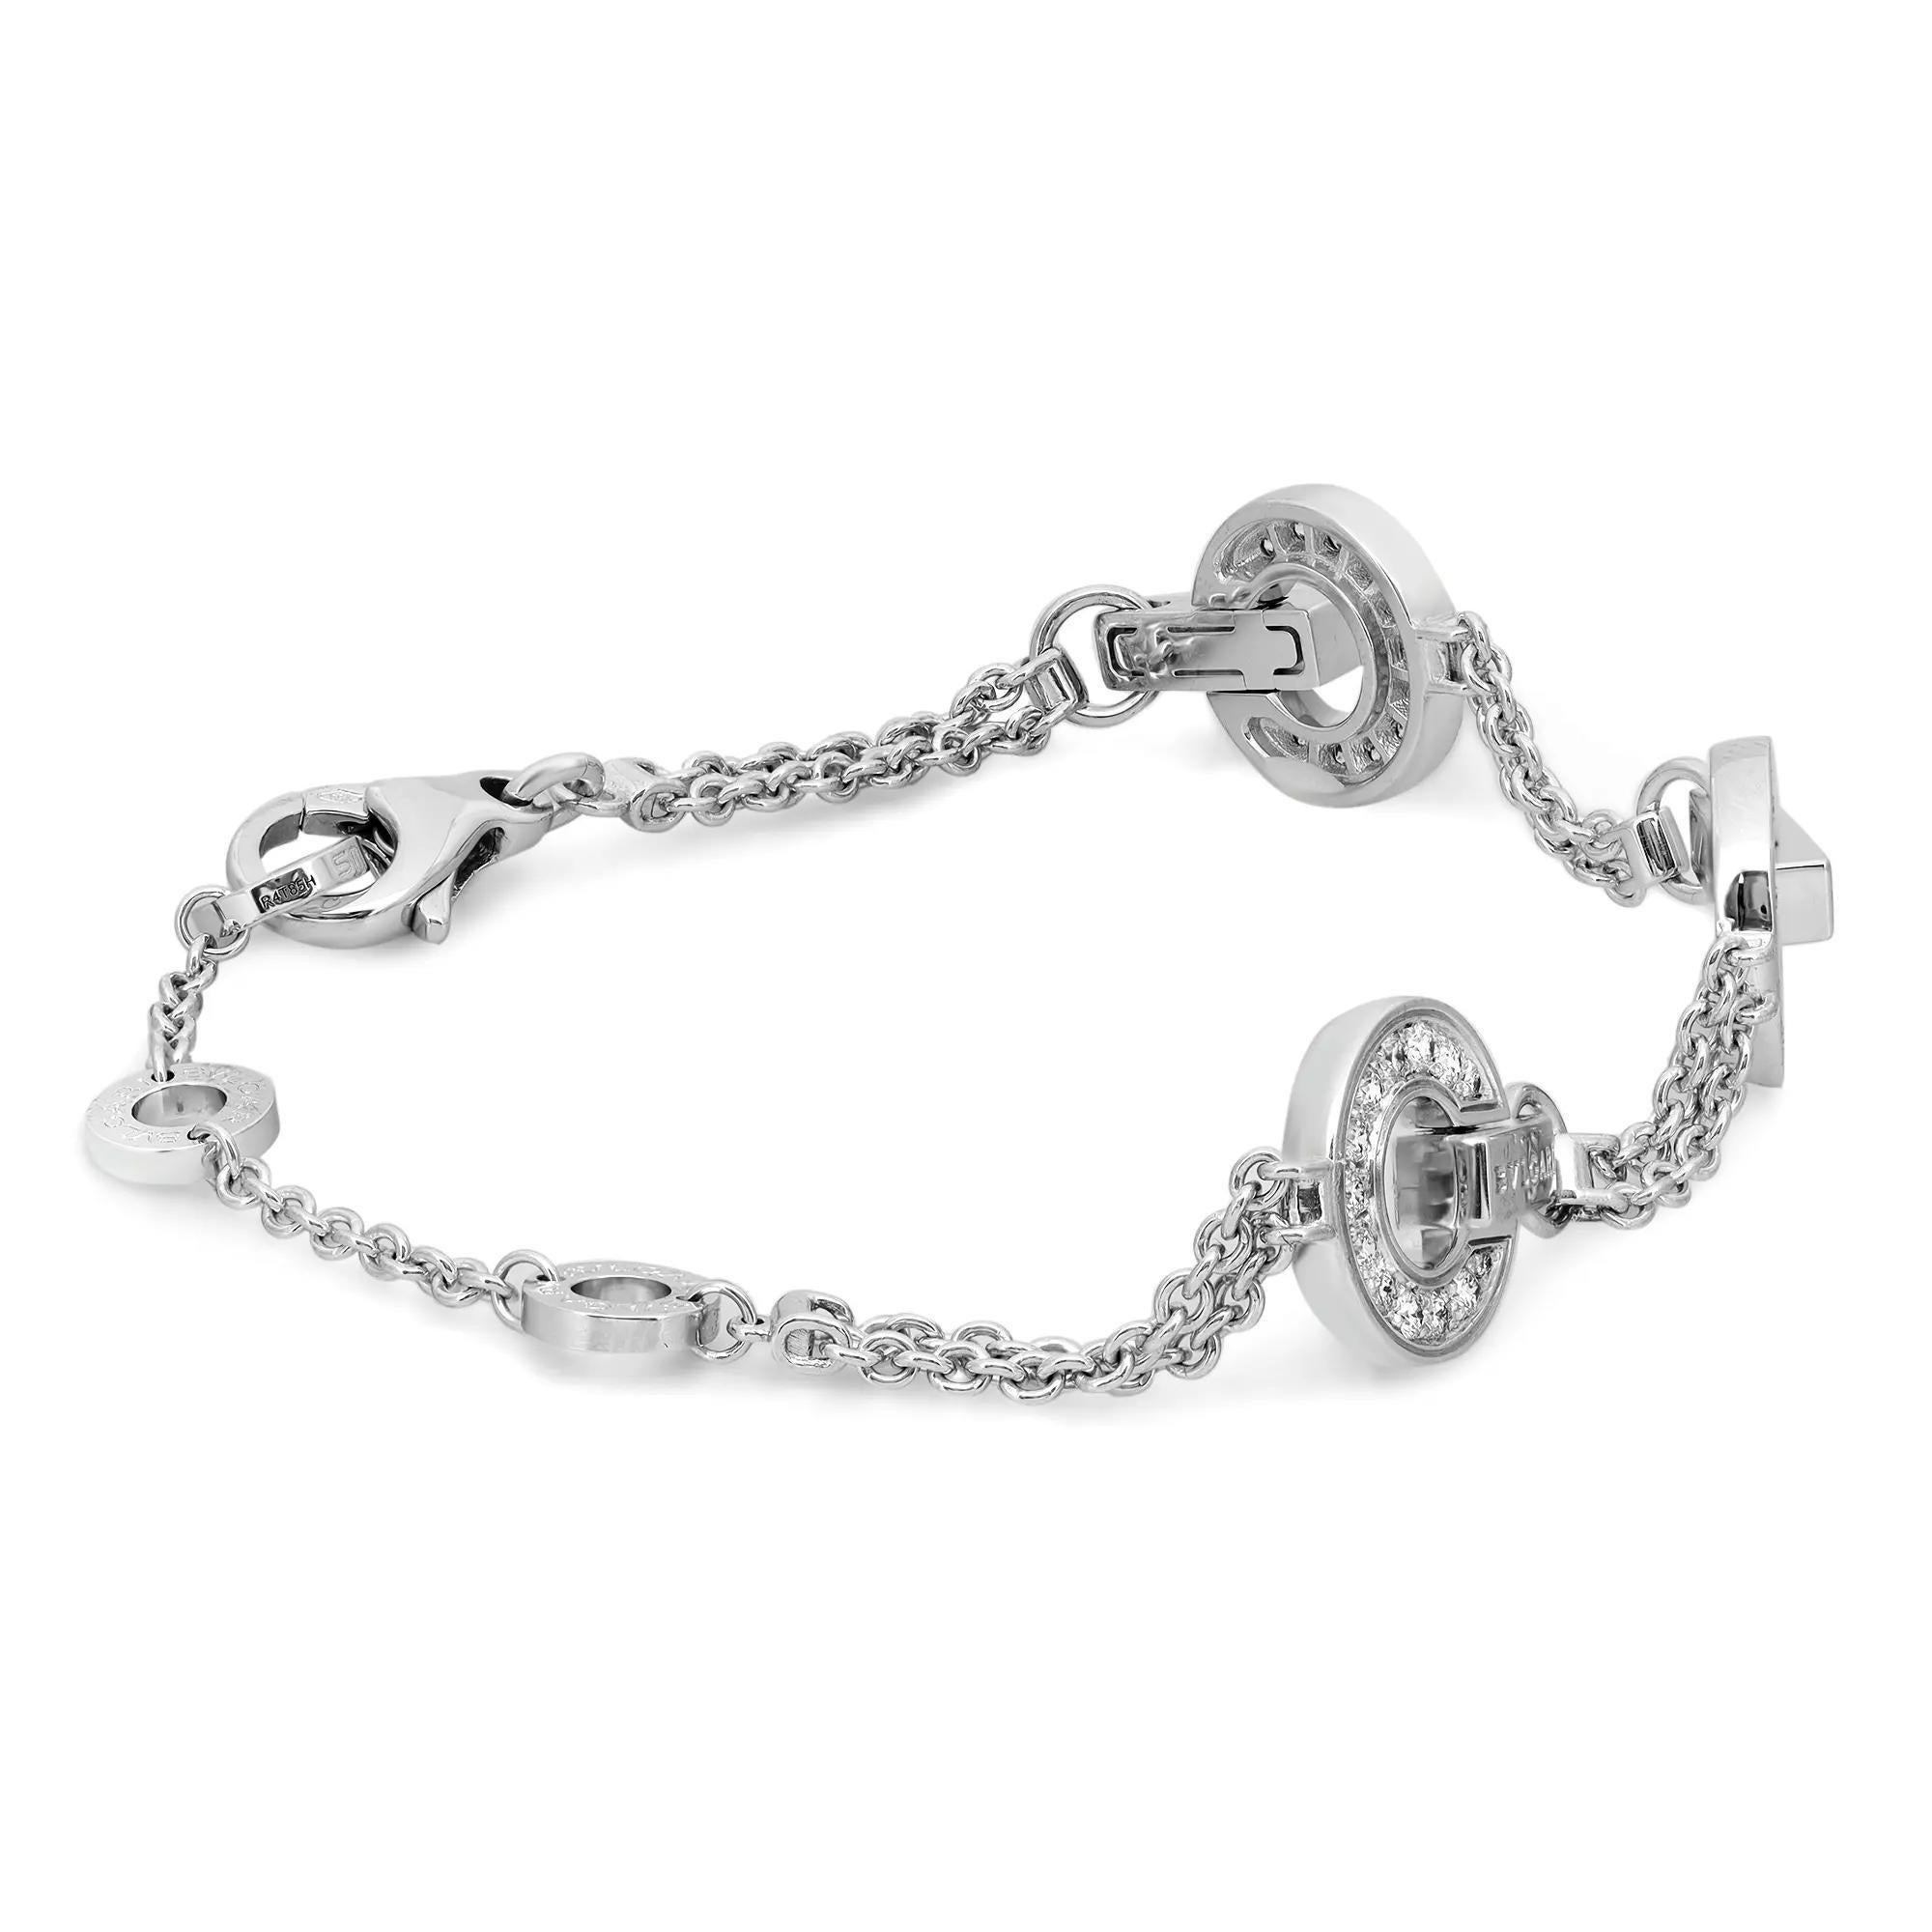 An elegant fusion of heritage and modernity, the BVLGARI BVLGARI bracelet is an effervescent and contemporary statement of sophistication. Crafted in lustrous 18K white gold. This bracelet features three openwork pave set round cut diamond studded